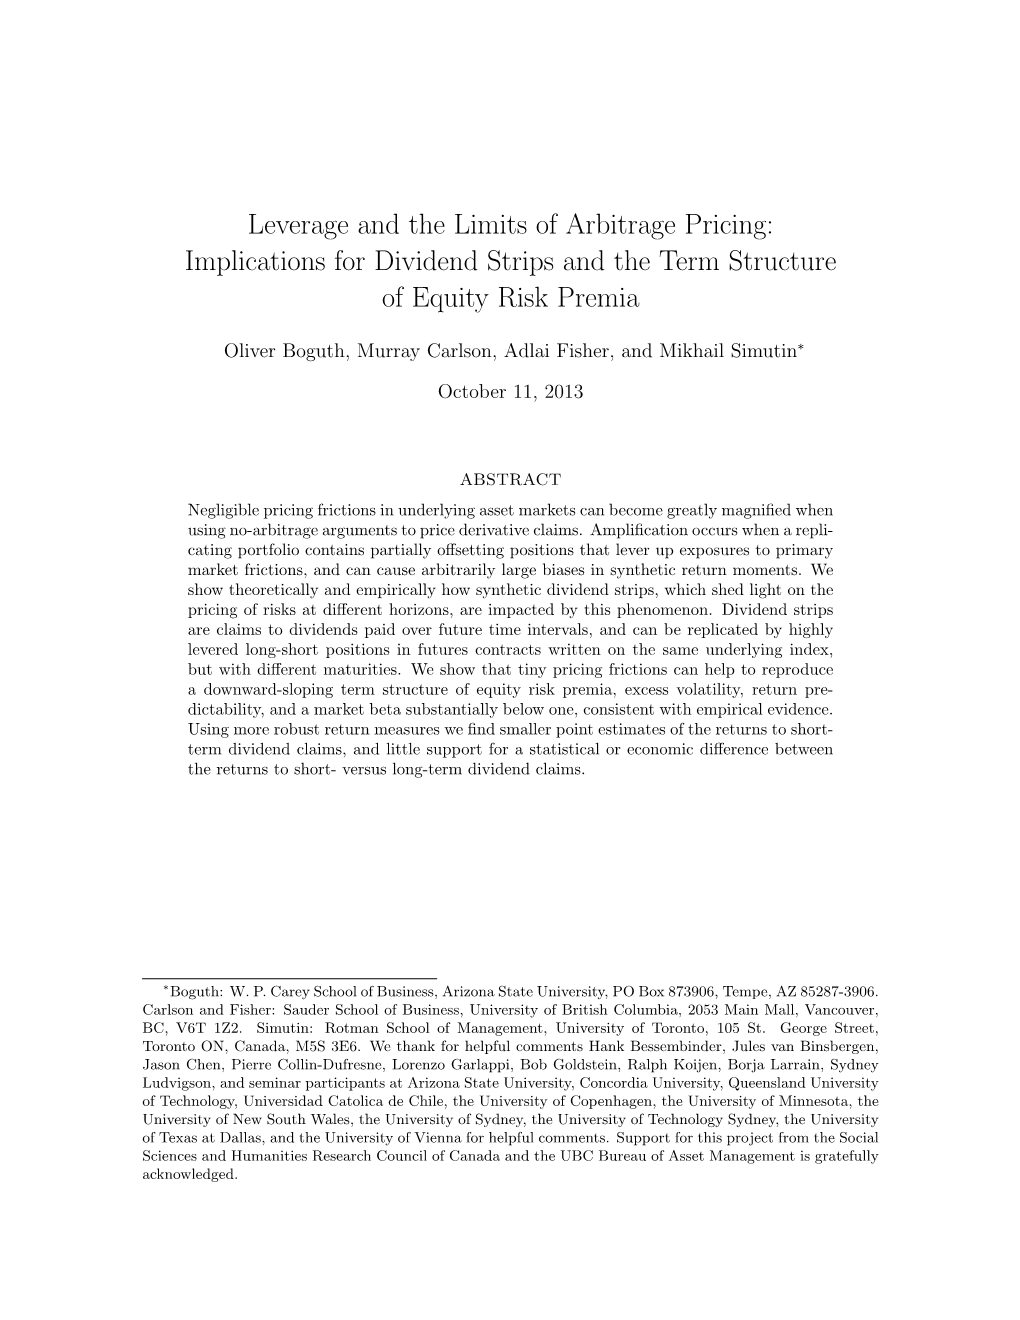 Leverage and the Limits of Arbitrage Pricing: Implications for Dividend Strips and the Term Structure of Equity Risk Premia